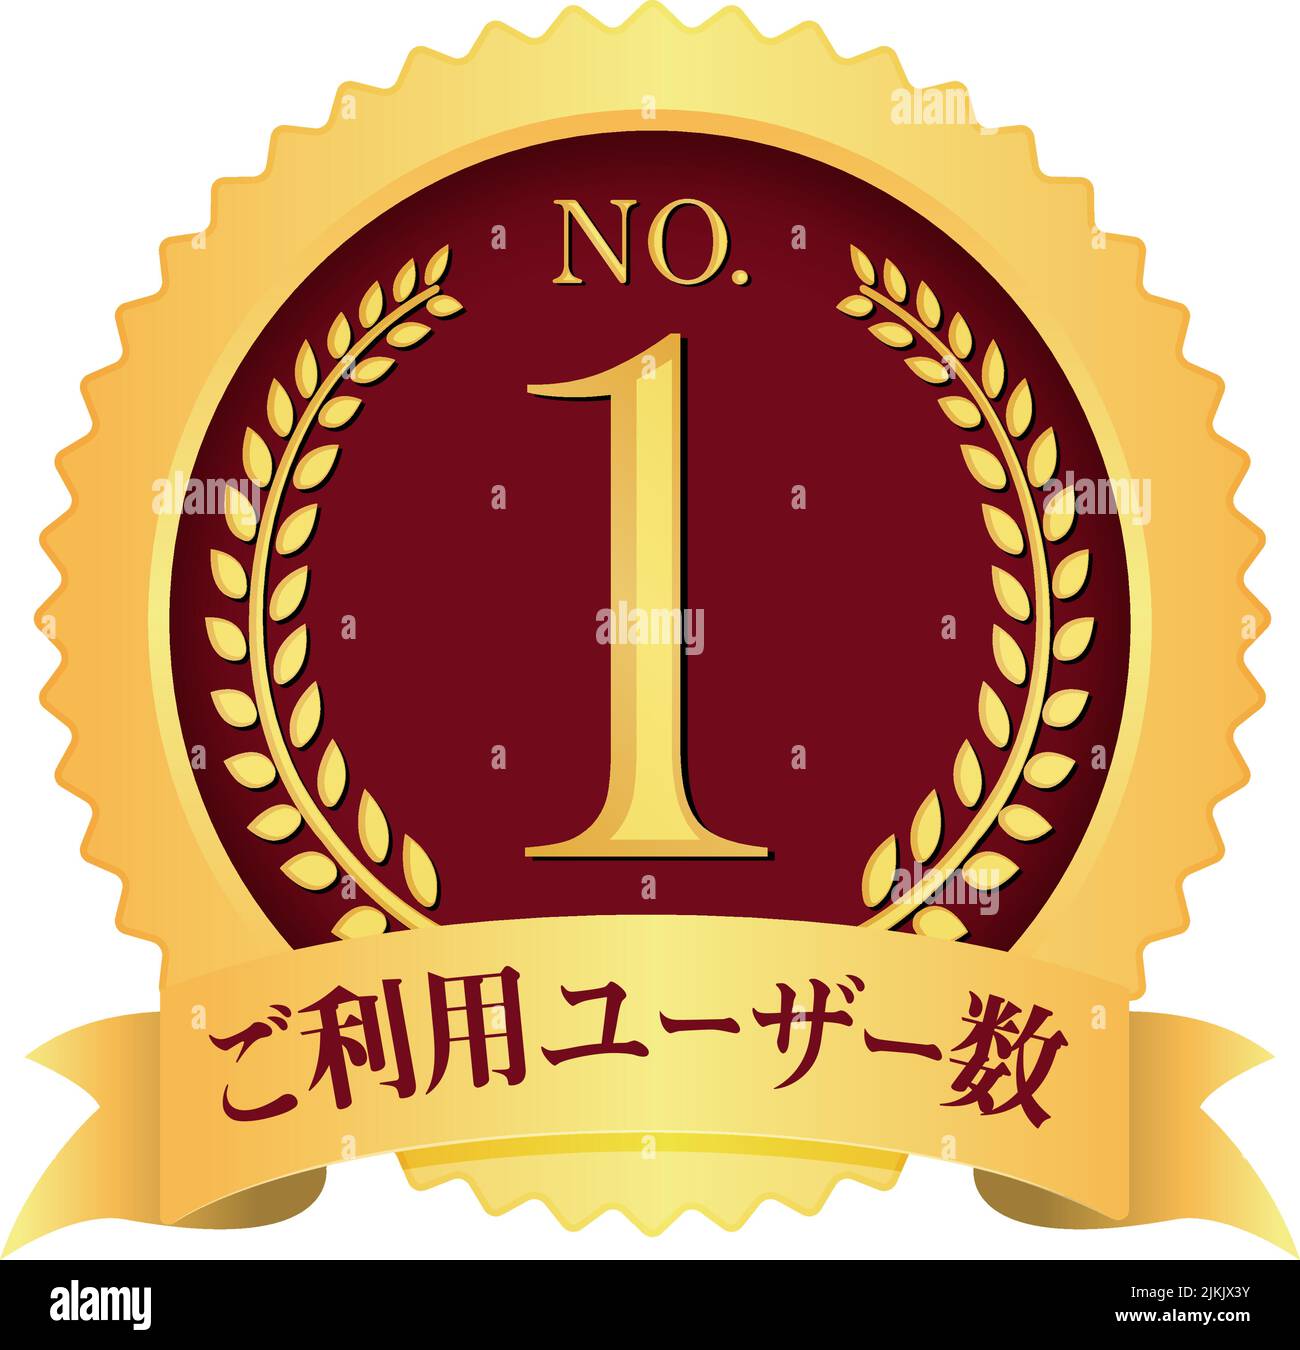 No.1 medal icon illustration | number of users Stock Vector